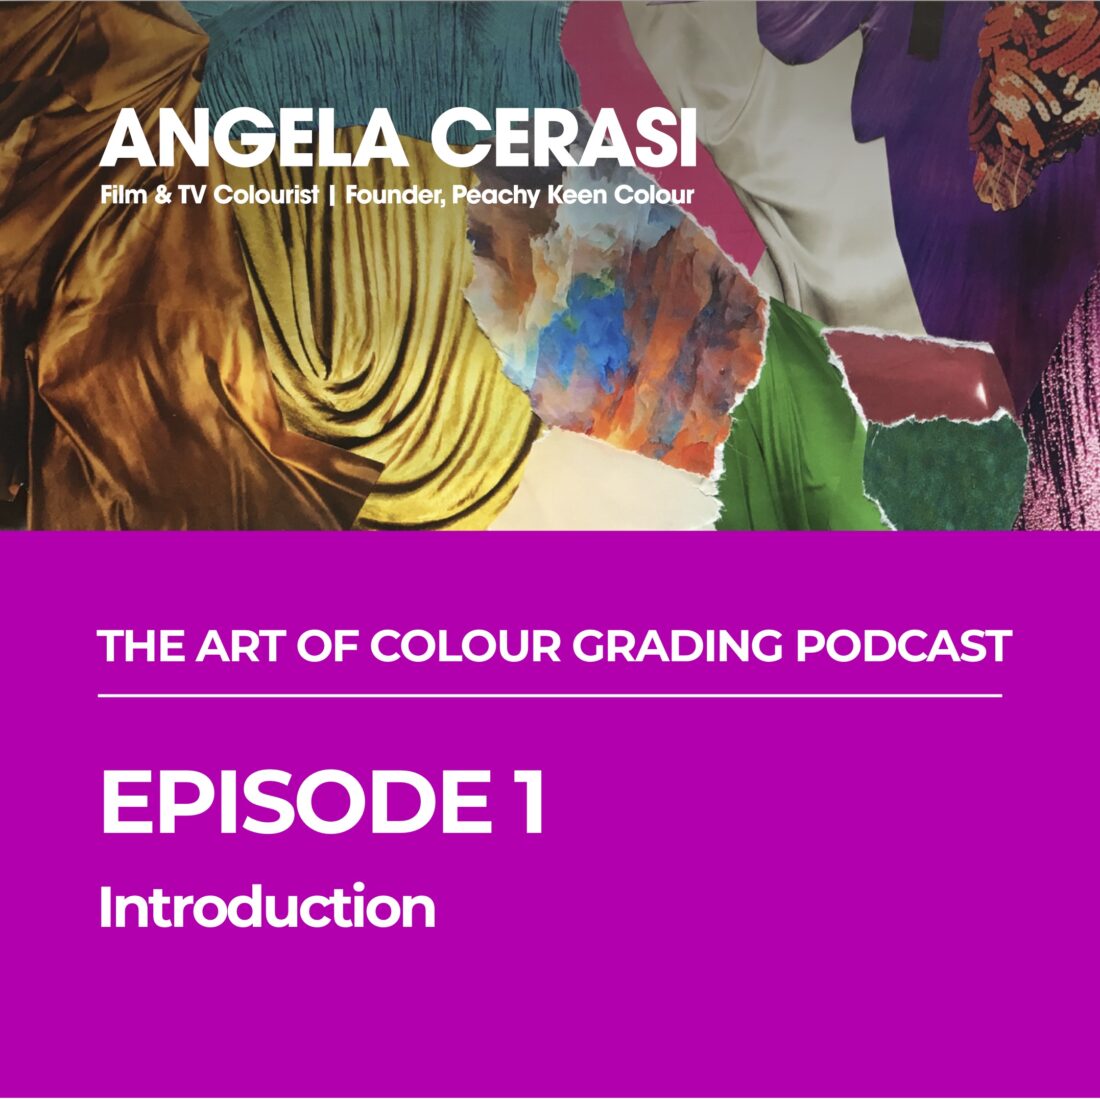 Introduction to senior colourist Angela Cerasi and her podcast "The Art of Colour Grading"